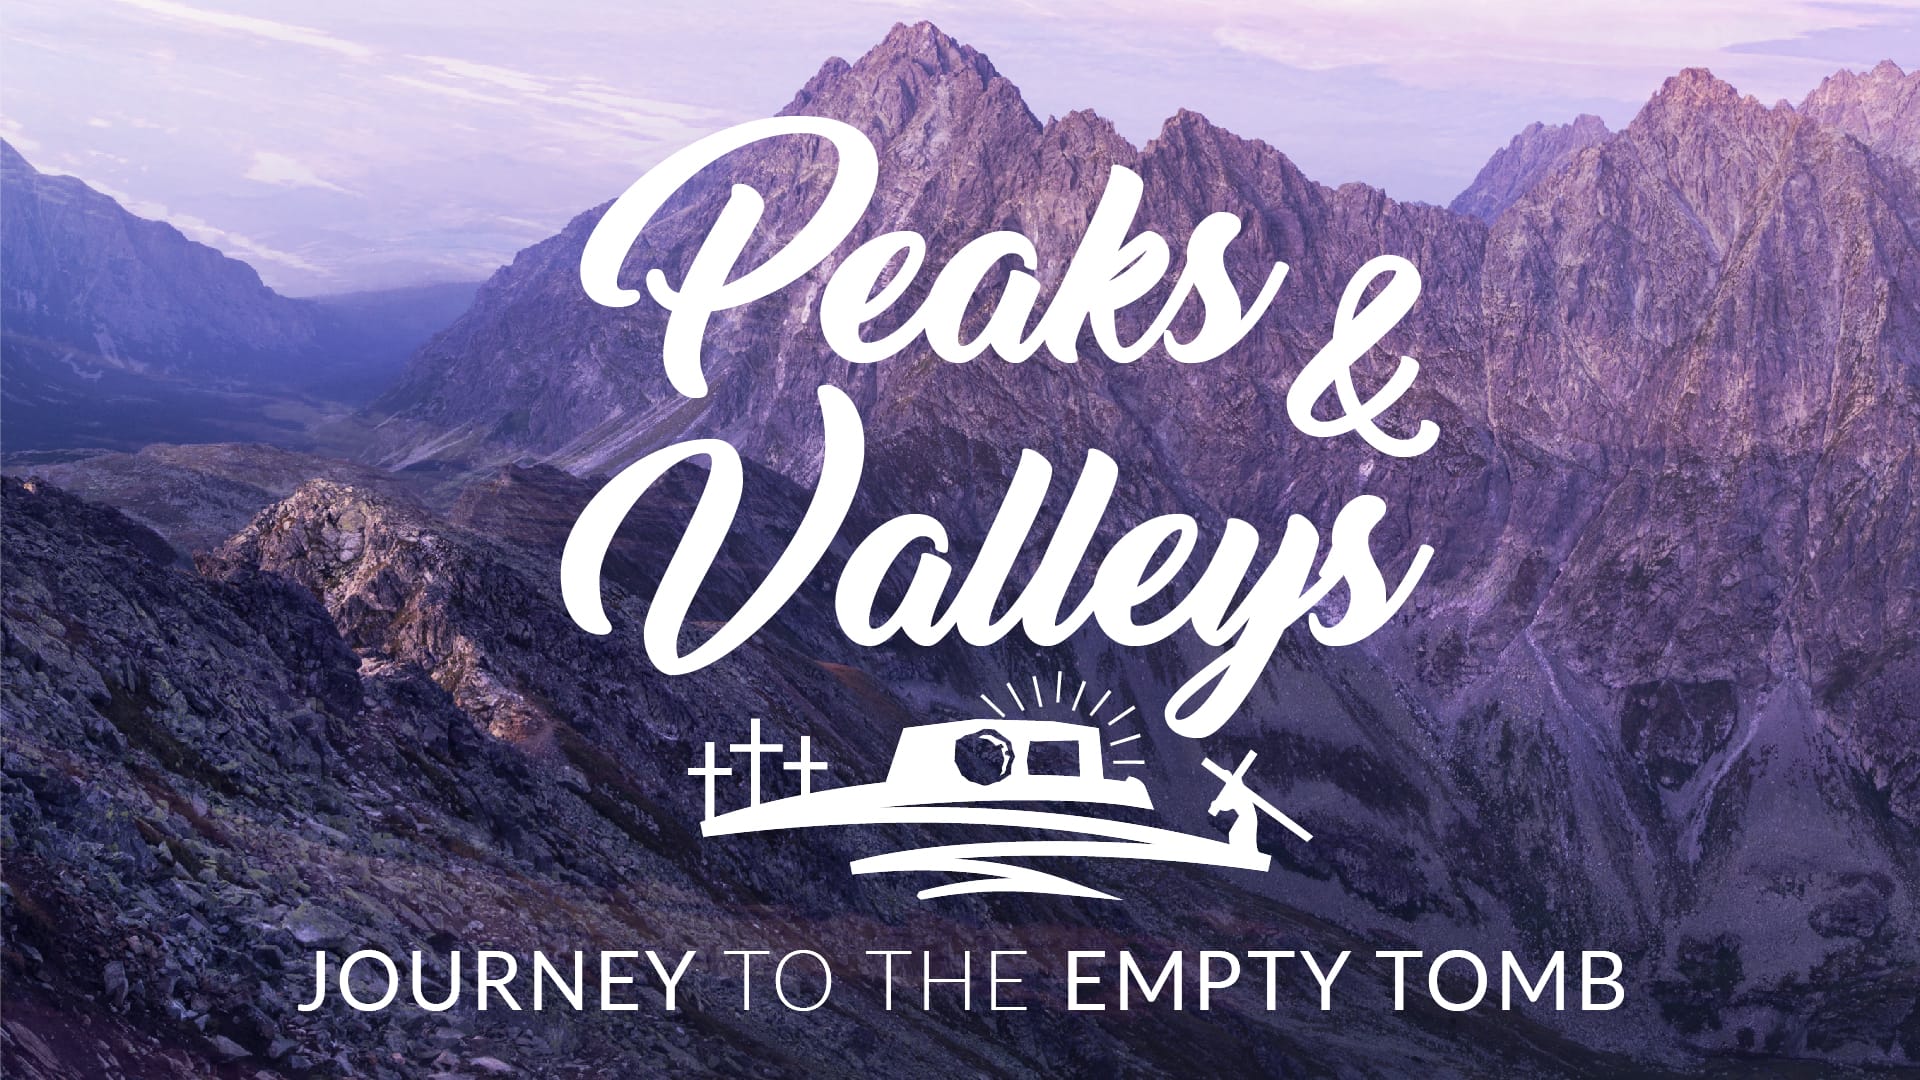 Peaks and Valleys: Journey to the Empty Tomb